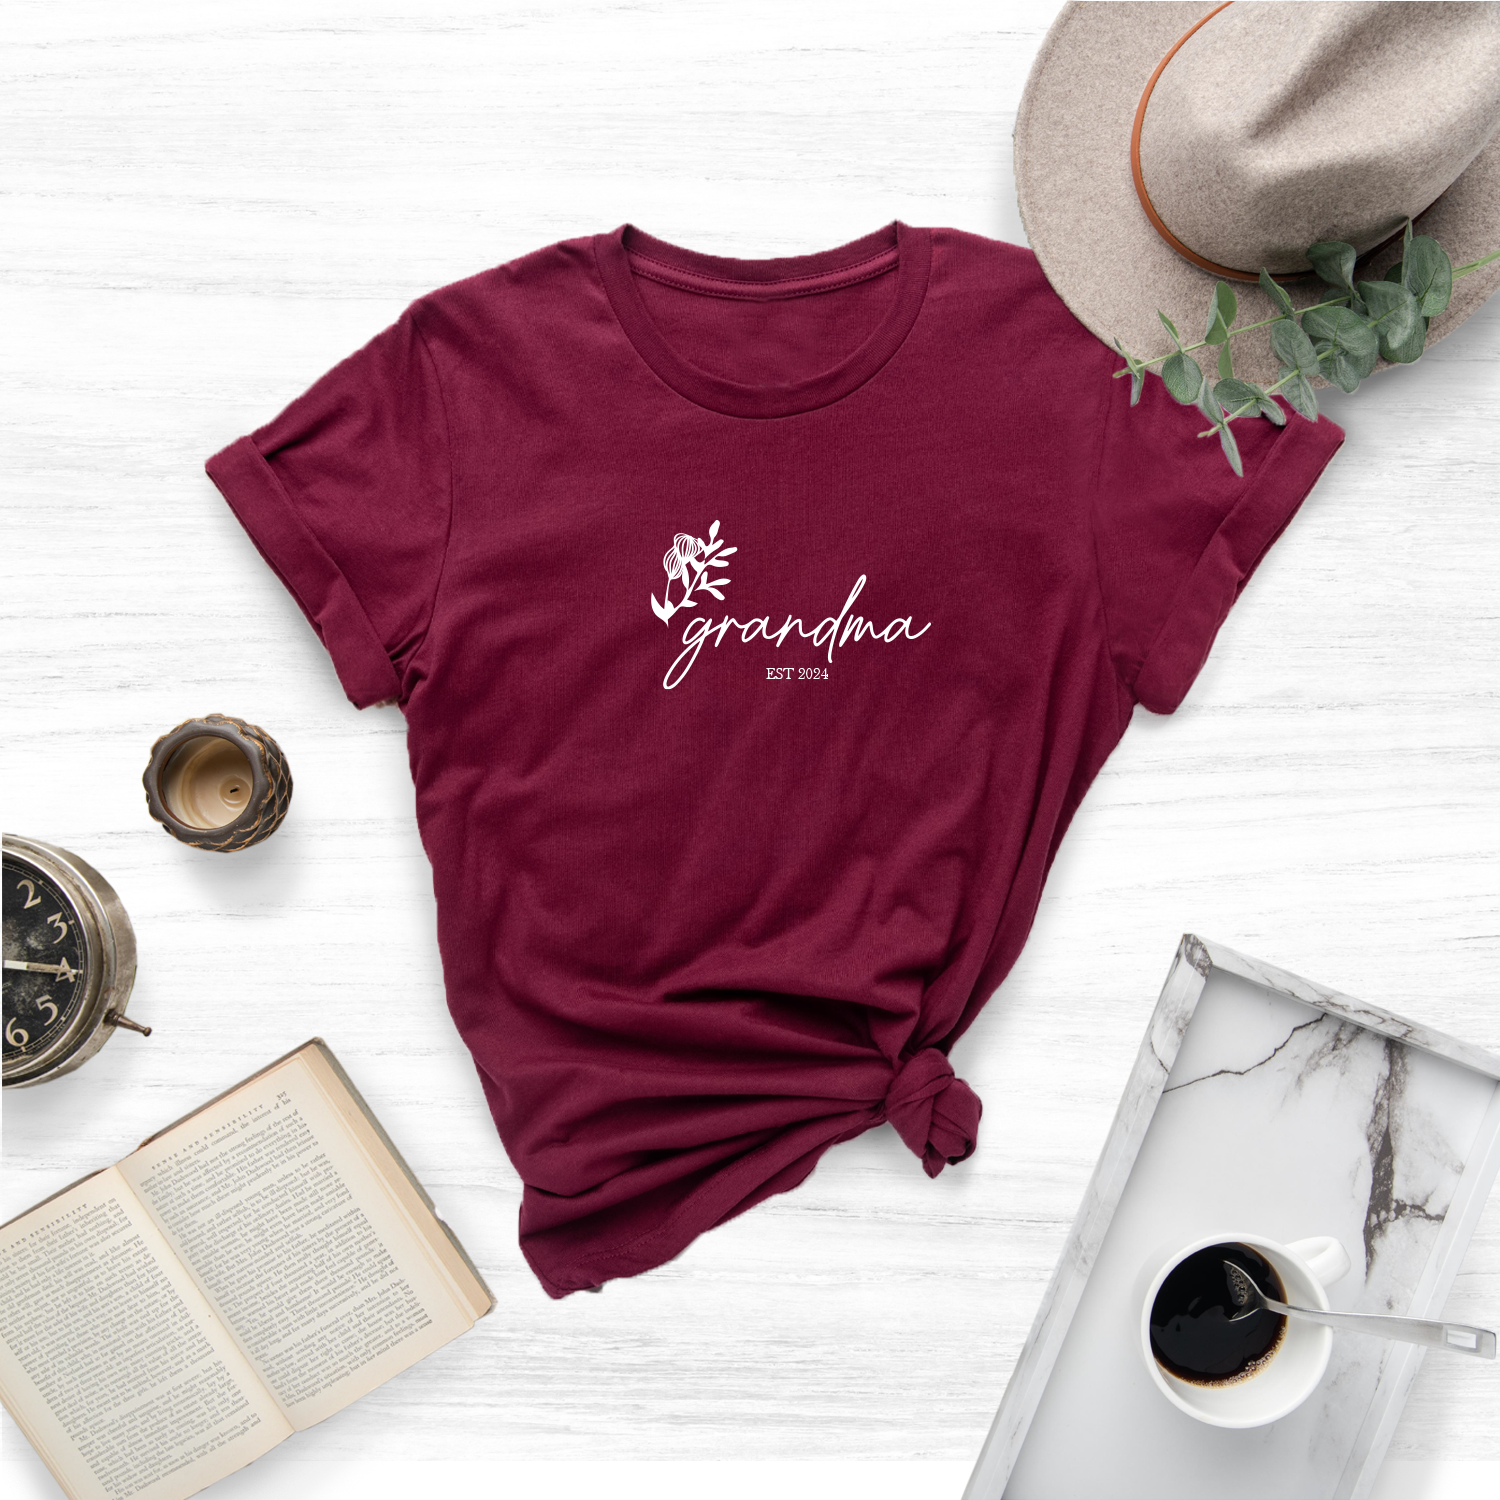 "Personalized 'Grandma' T-shirt with a loving Mother's Day message.